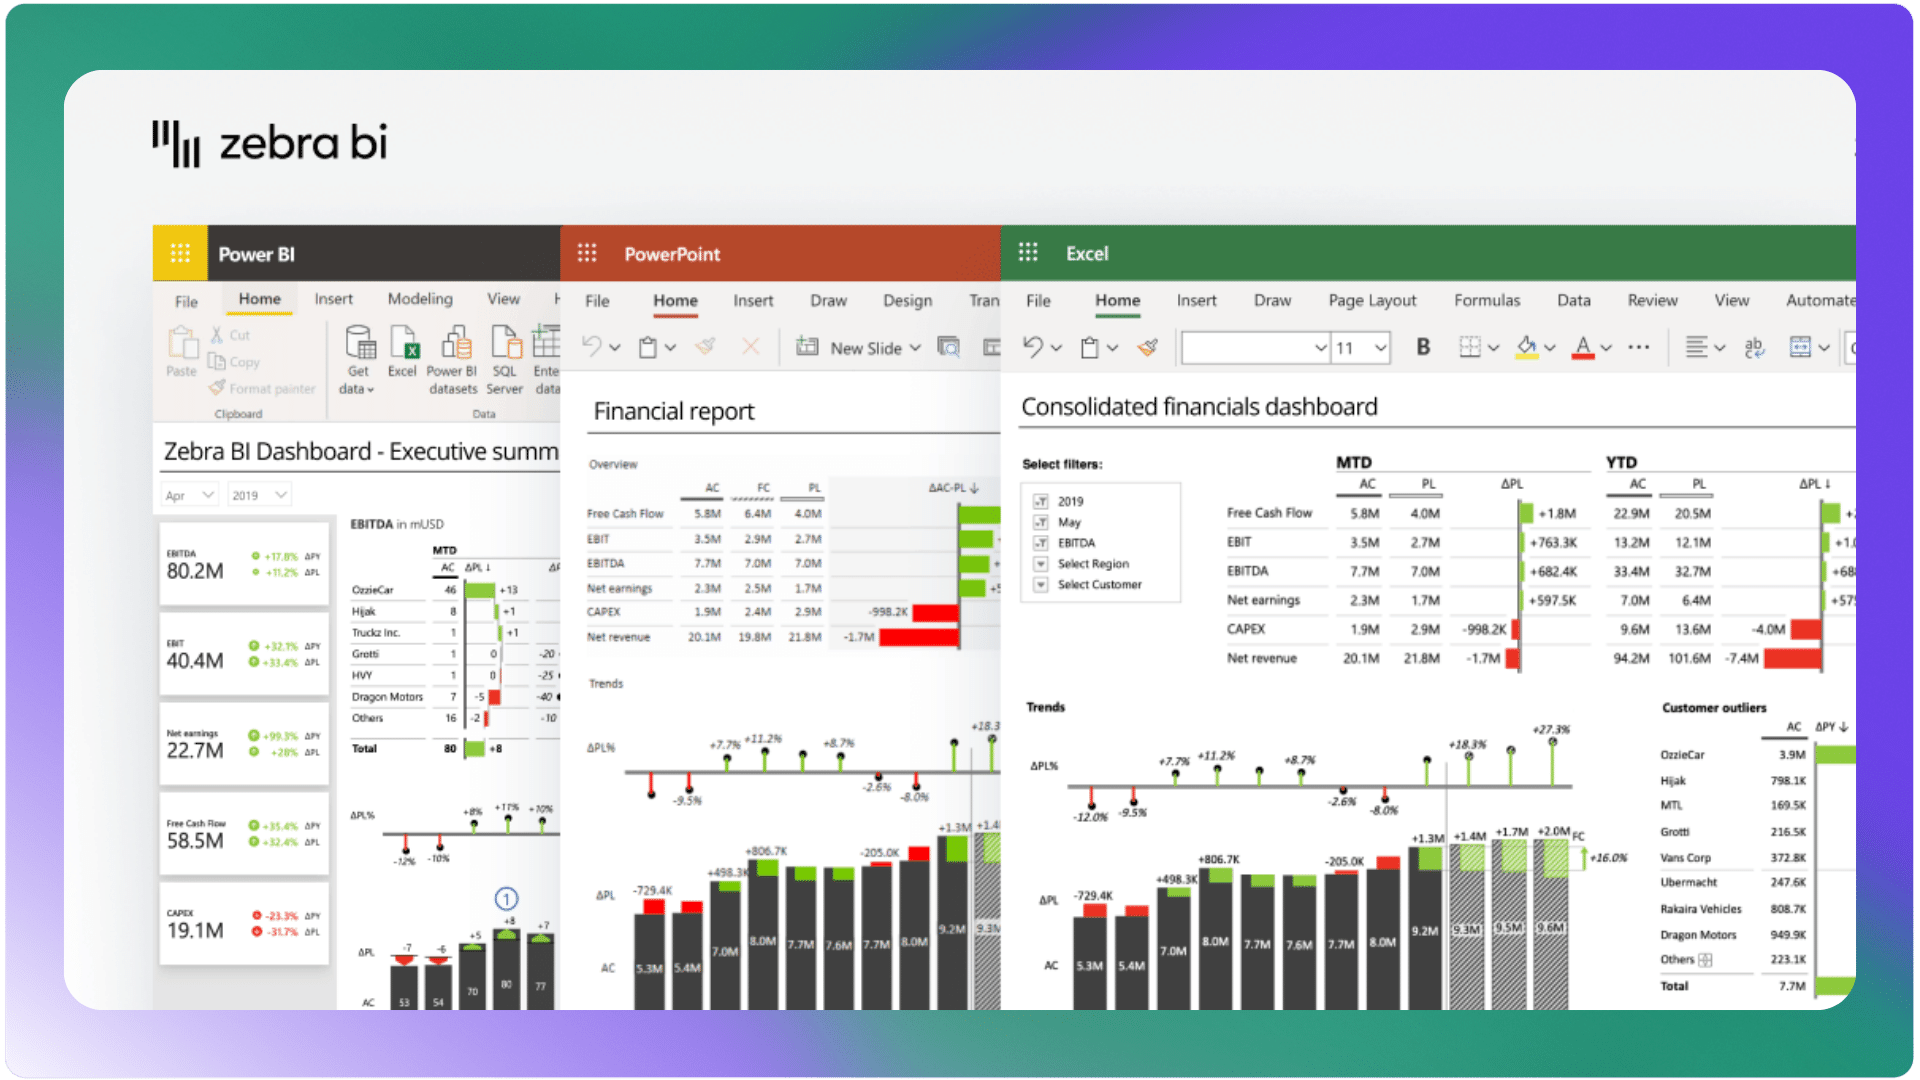 An image that shows different dashboards and interactive visualisations that are built in Excel by Zebra BI.